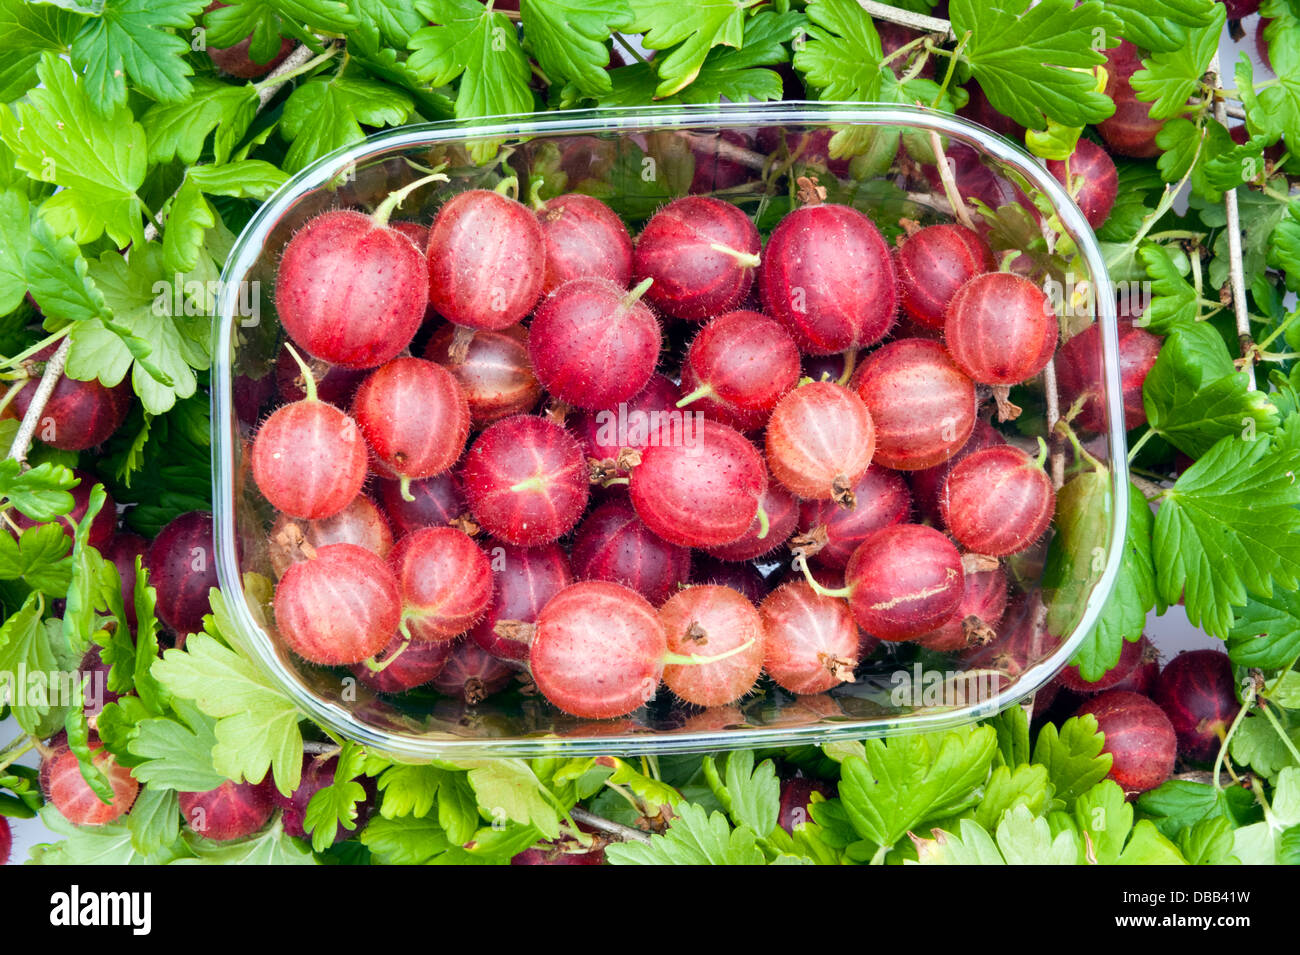 Gooseberries fresh from the garden. A punnet of fruit from a gooseberry bush sitting on a bed of leaves. Stock Photo